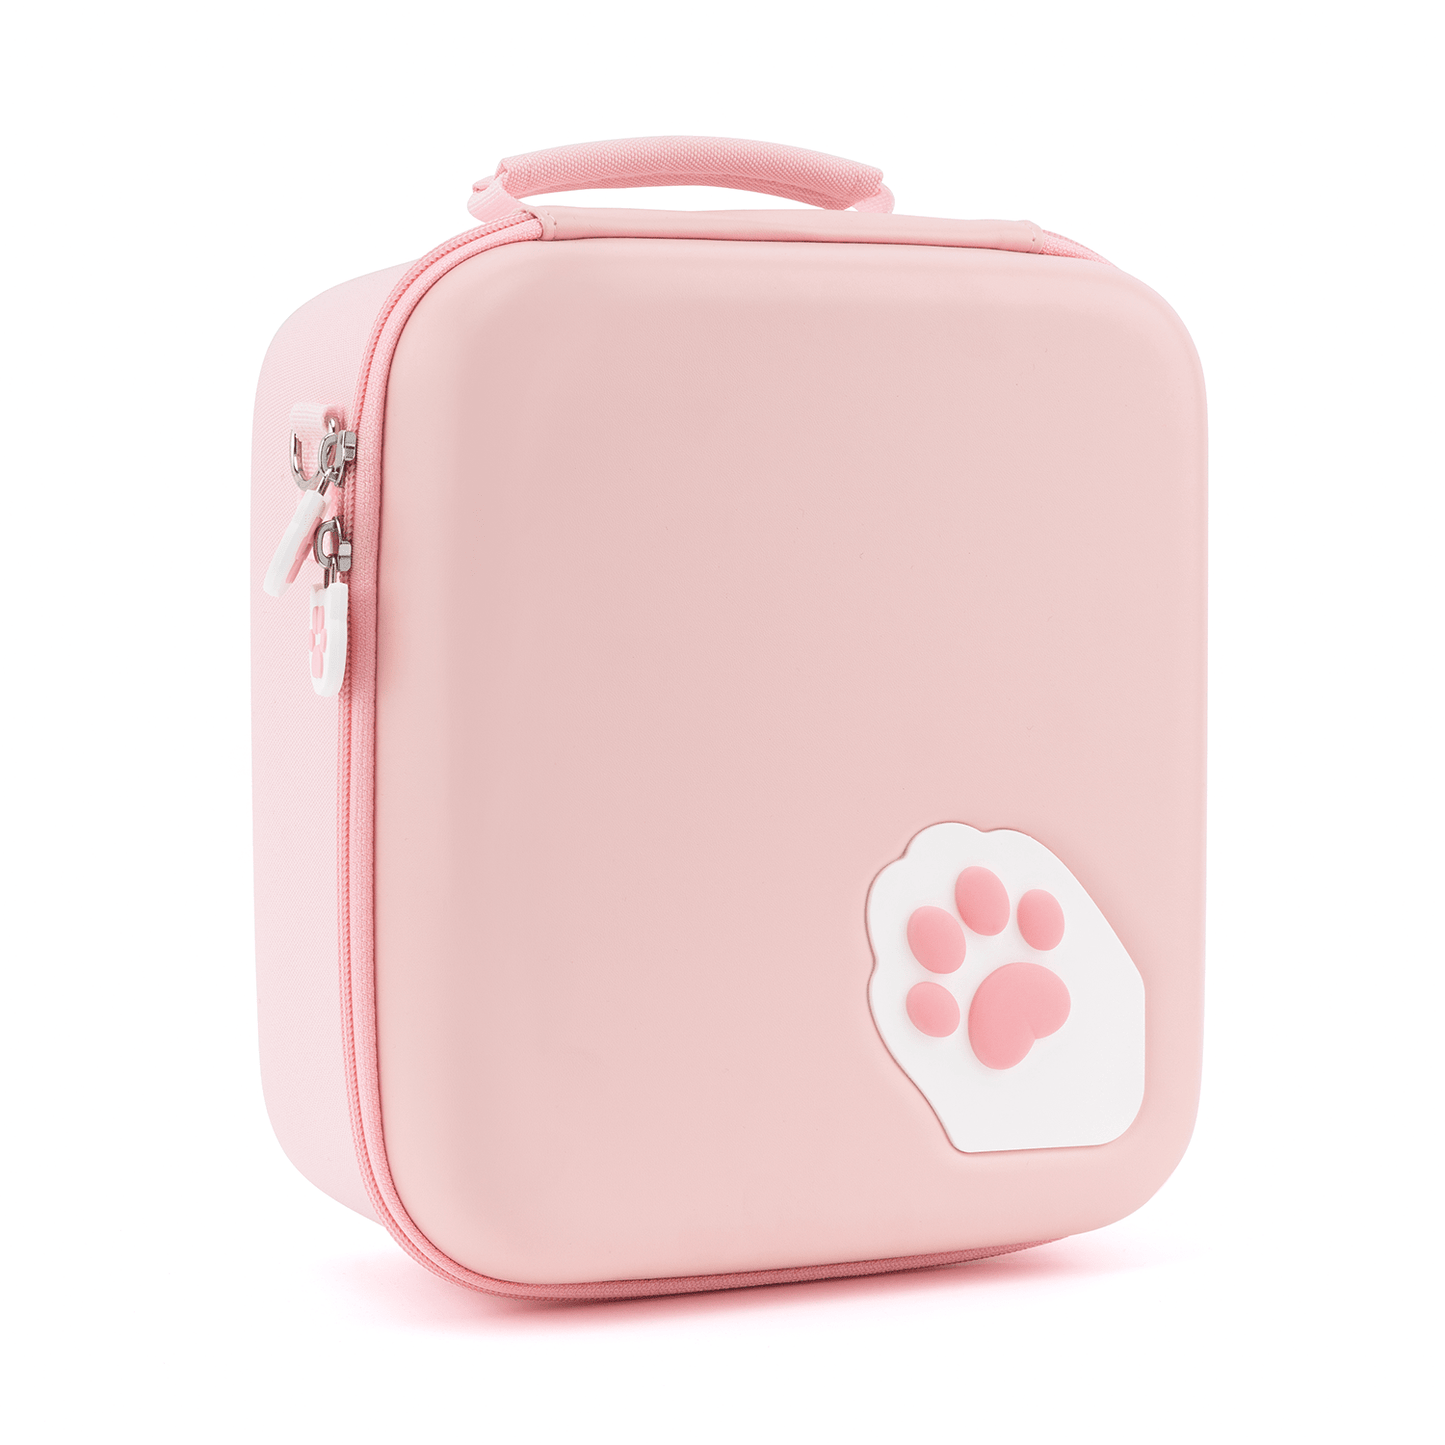 GeekShare Max Cat Paw Case-Pink GeekShare Cat Paw Case for Nintendo Switch -- Pink